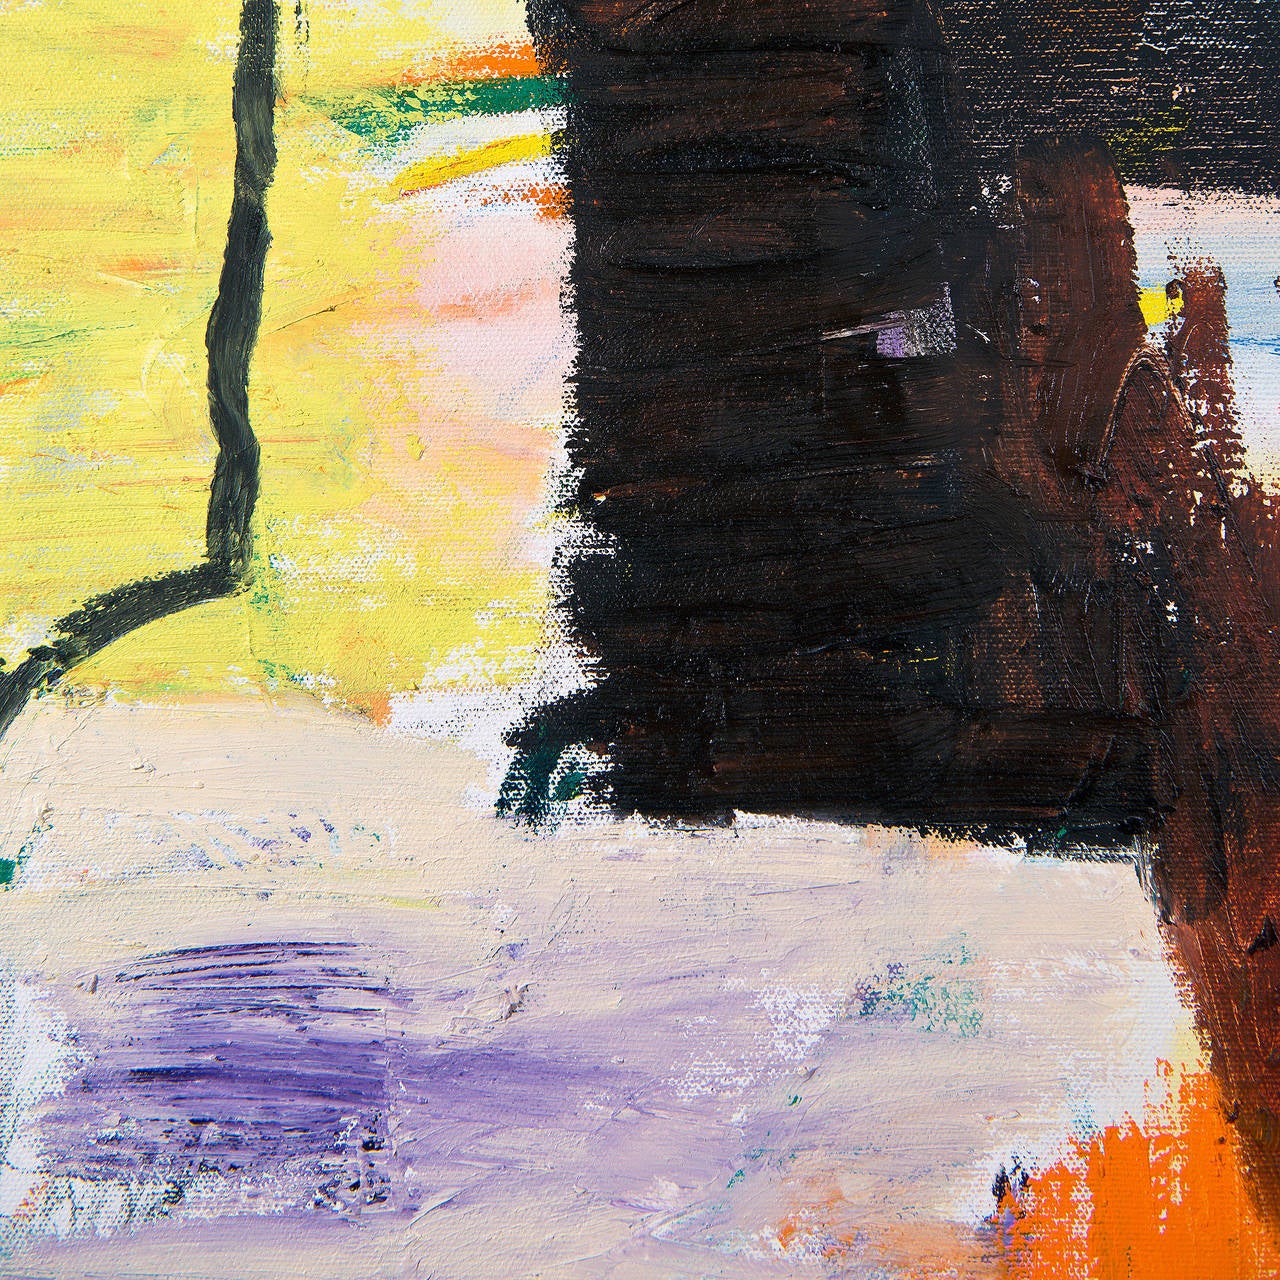 Abstract : Boardwalk, Popcorn, the Corndog Vendor - Abstract Expressionist Painting by Enrico Riley